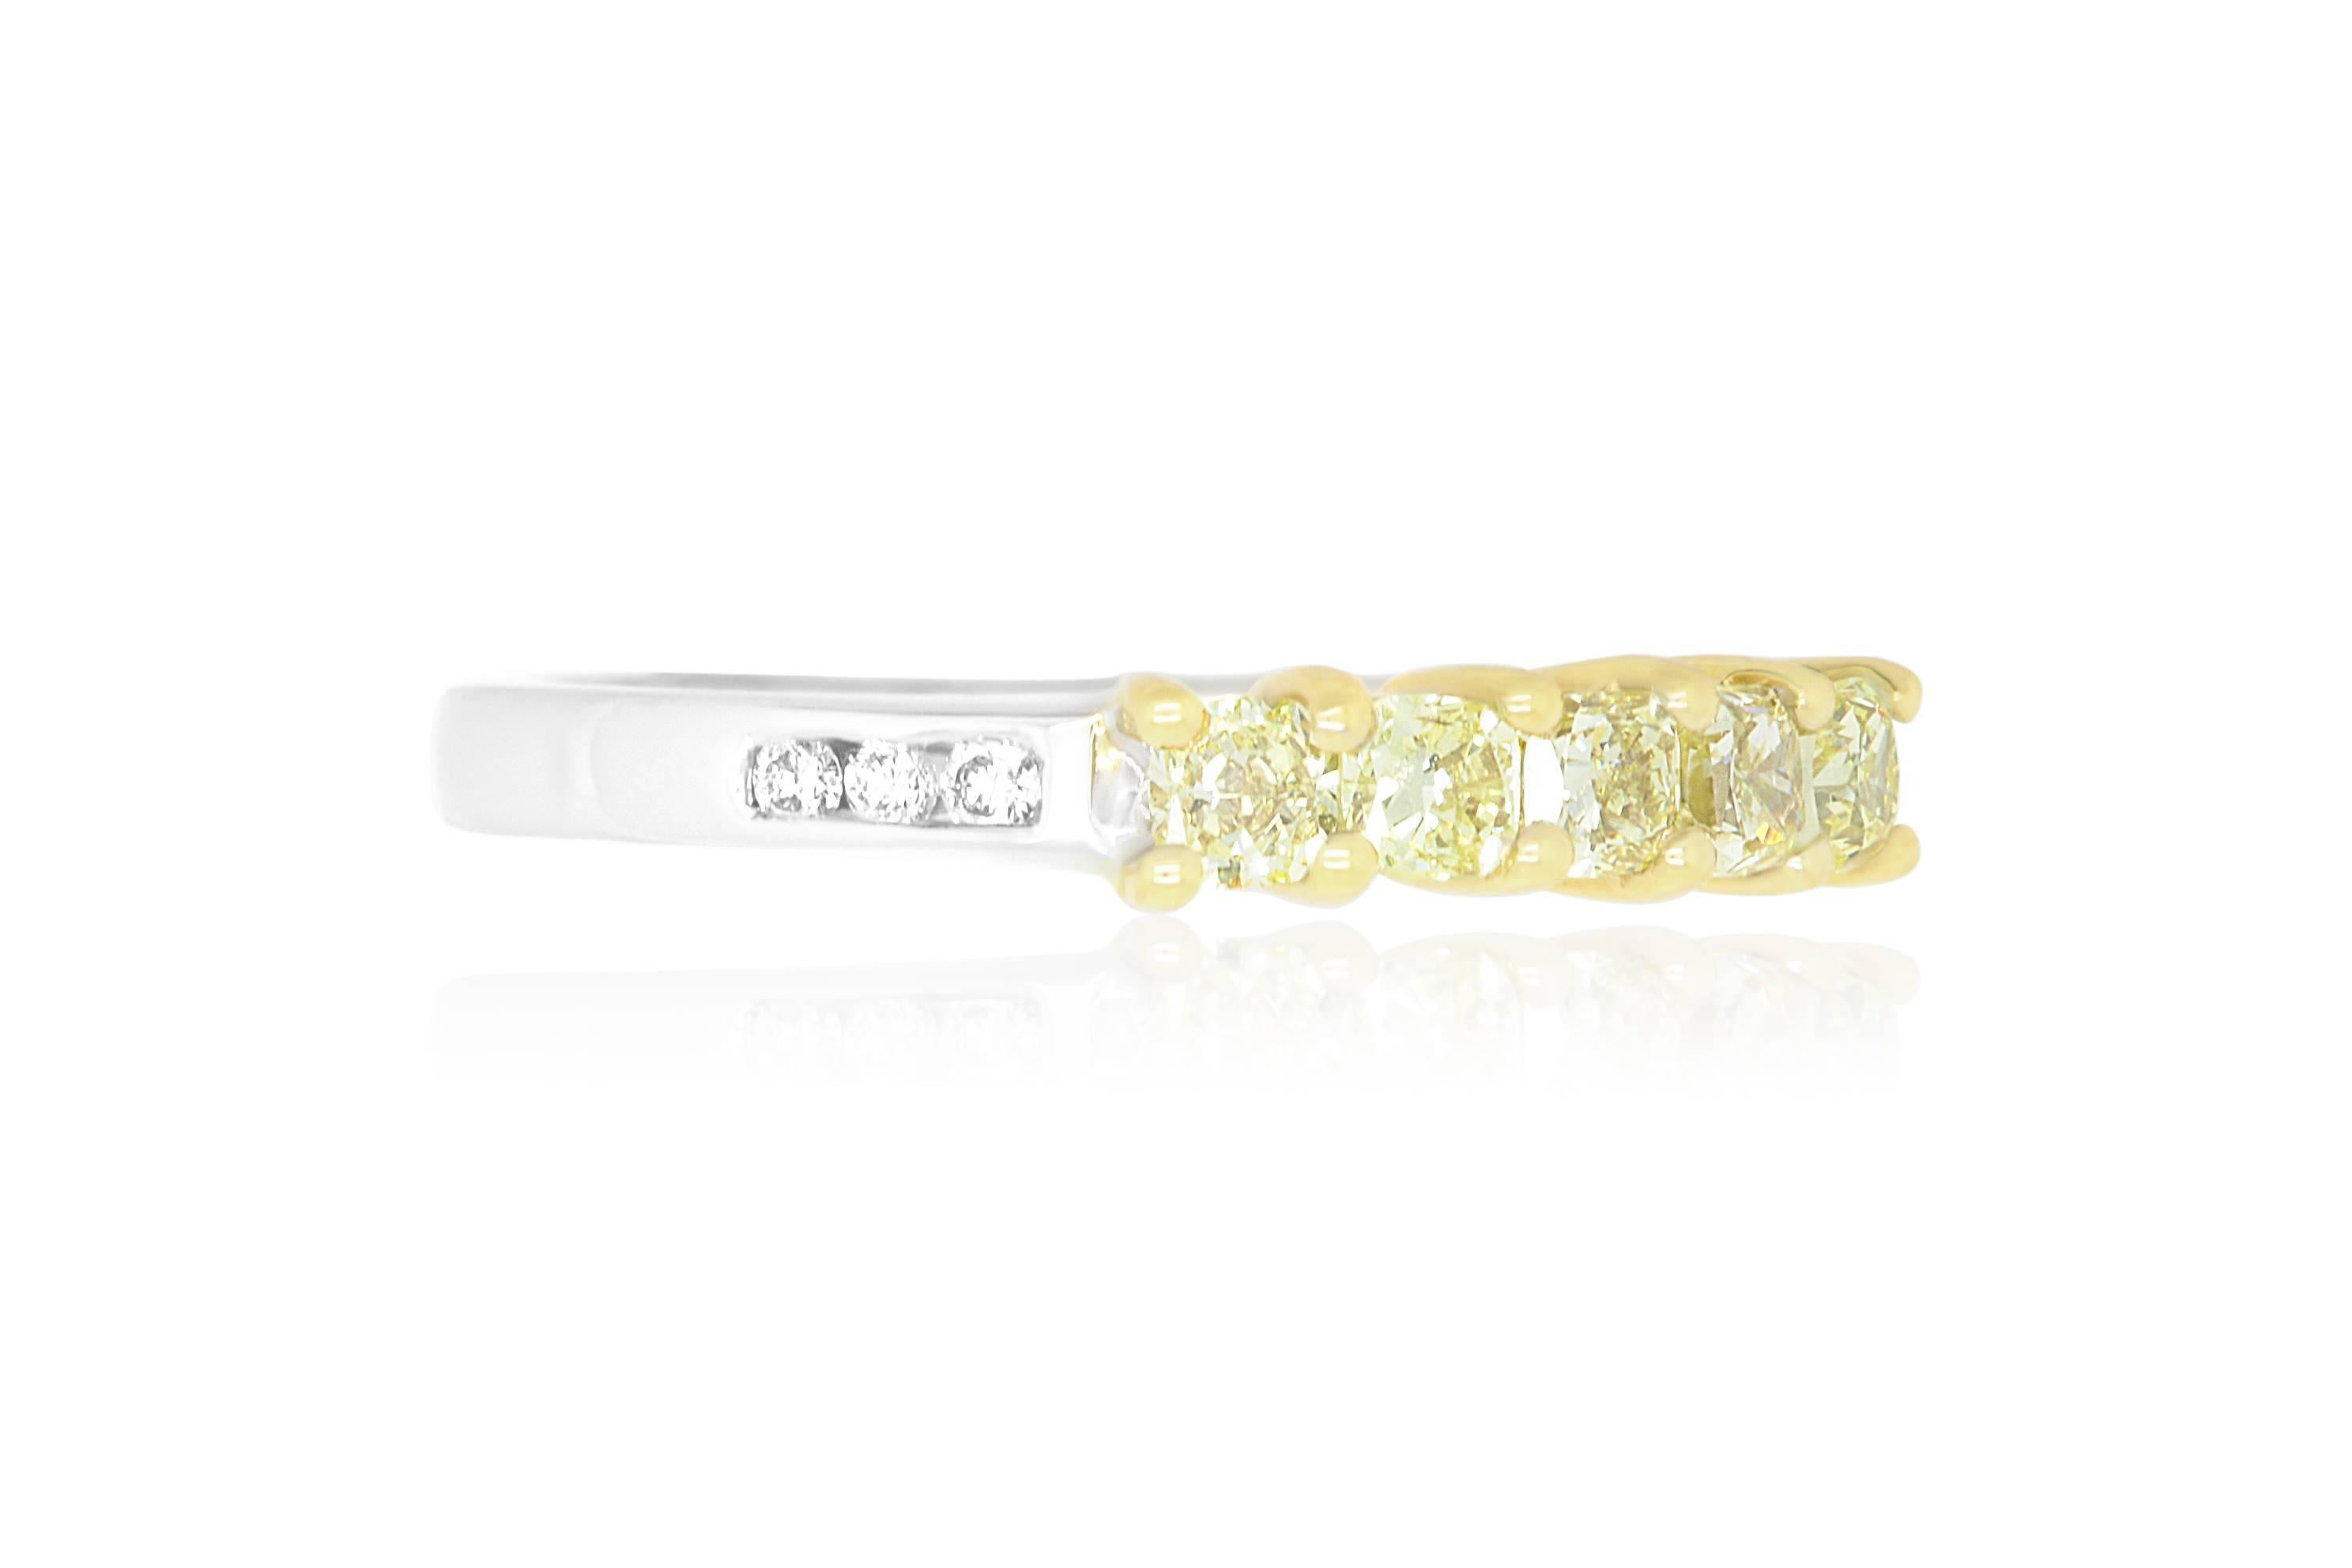 Material: 14K White Gold 
Main Stone Details: 5 Cushion Cut Yellow Diamond at 0.87 Carats 
Stone Details: 6 Round Shaped White Diamonds at 0.11 Carats -  Clarity: SI  / Color: H-I
Ring Size: Size 9. Alberto offers complimentary sizing on all